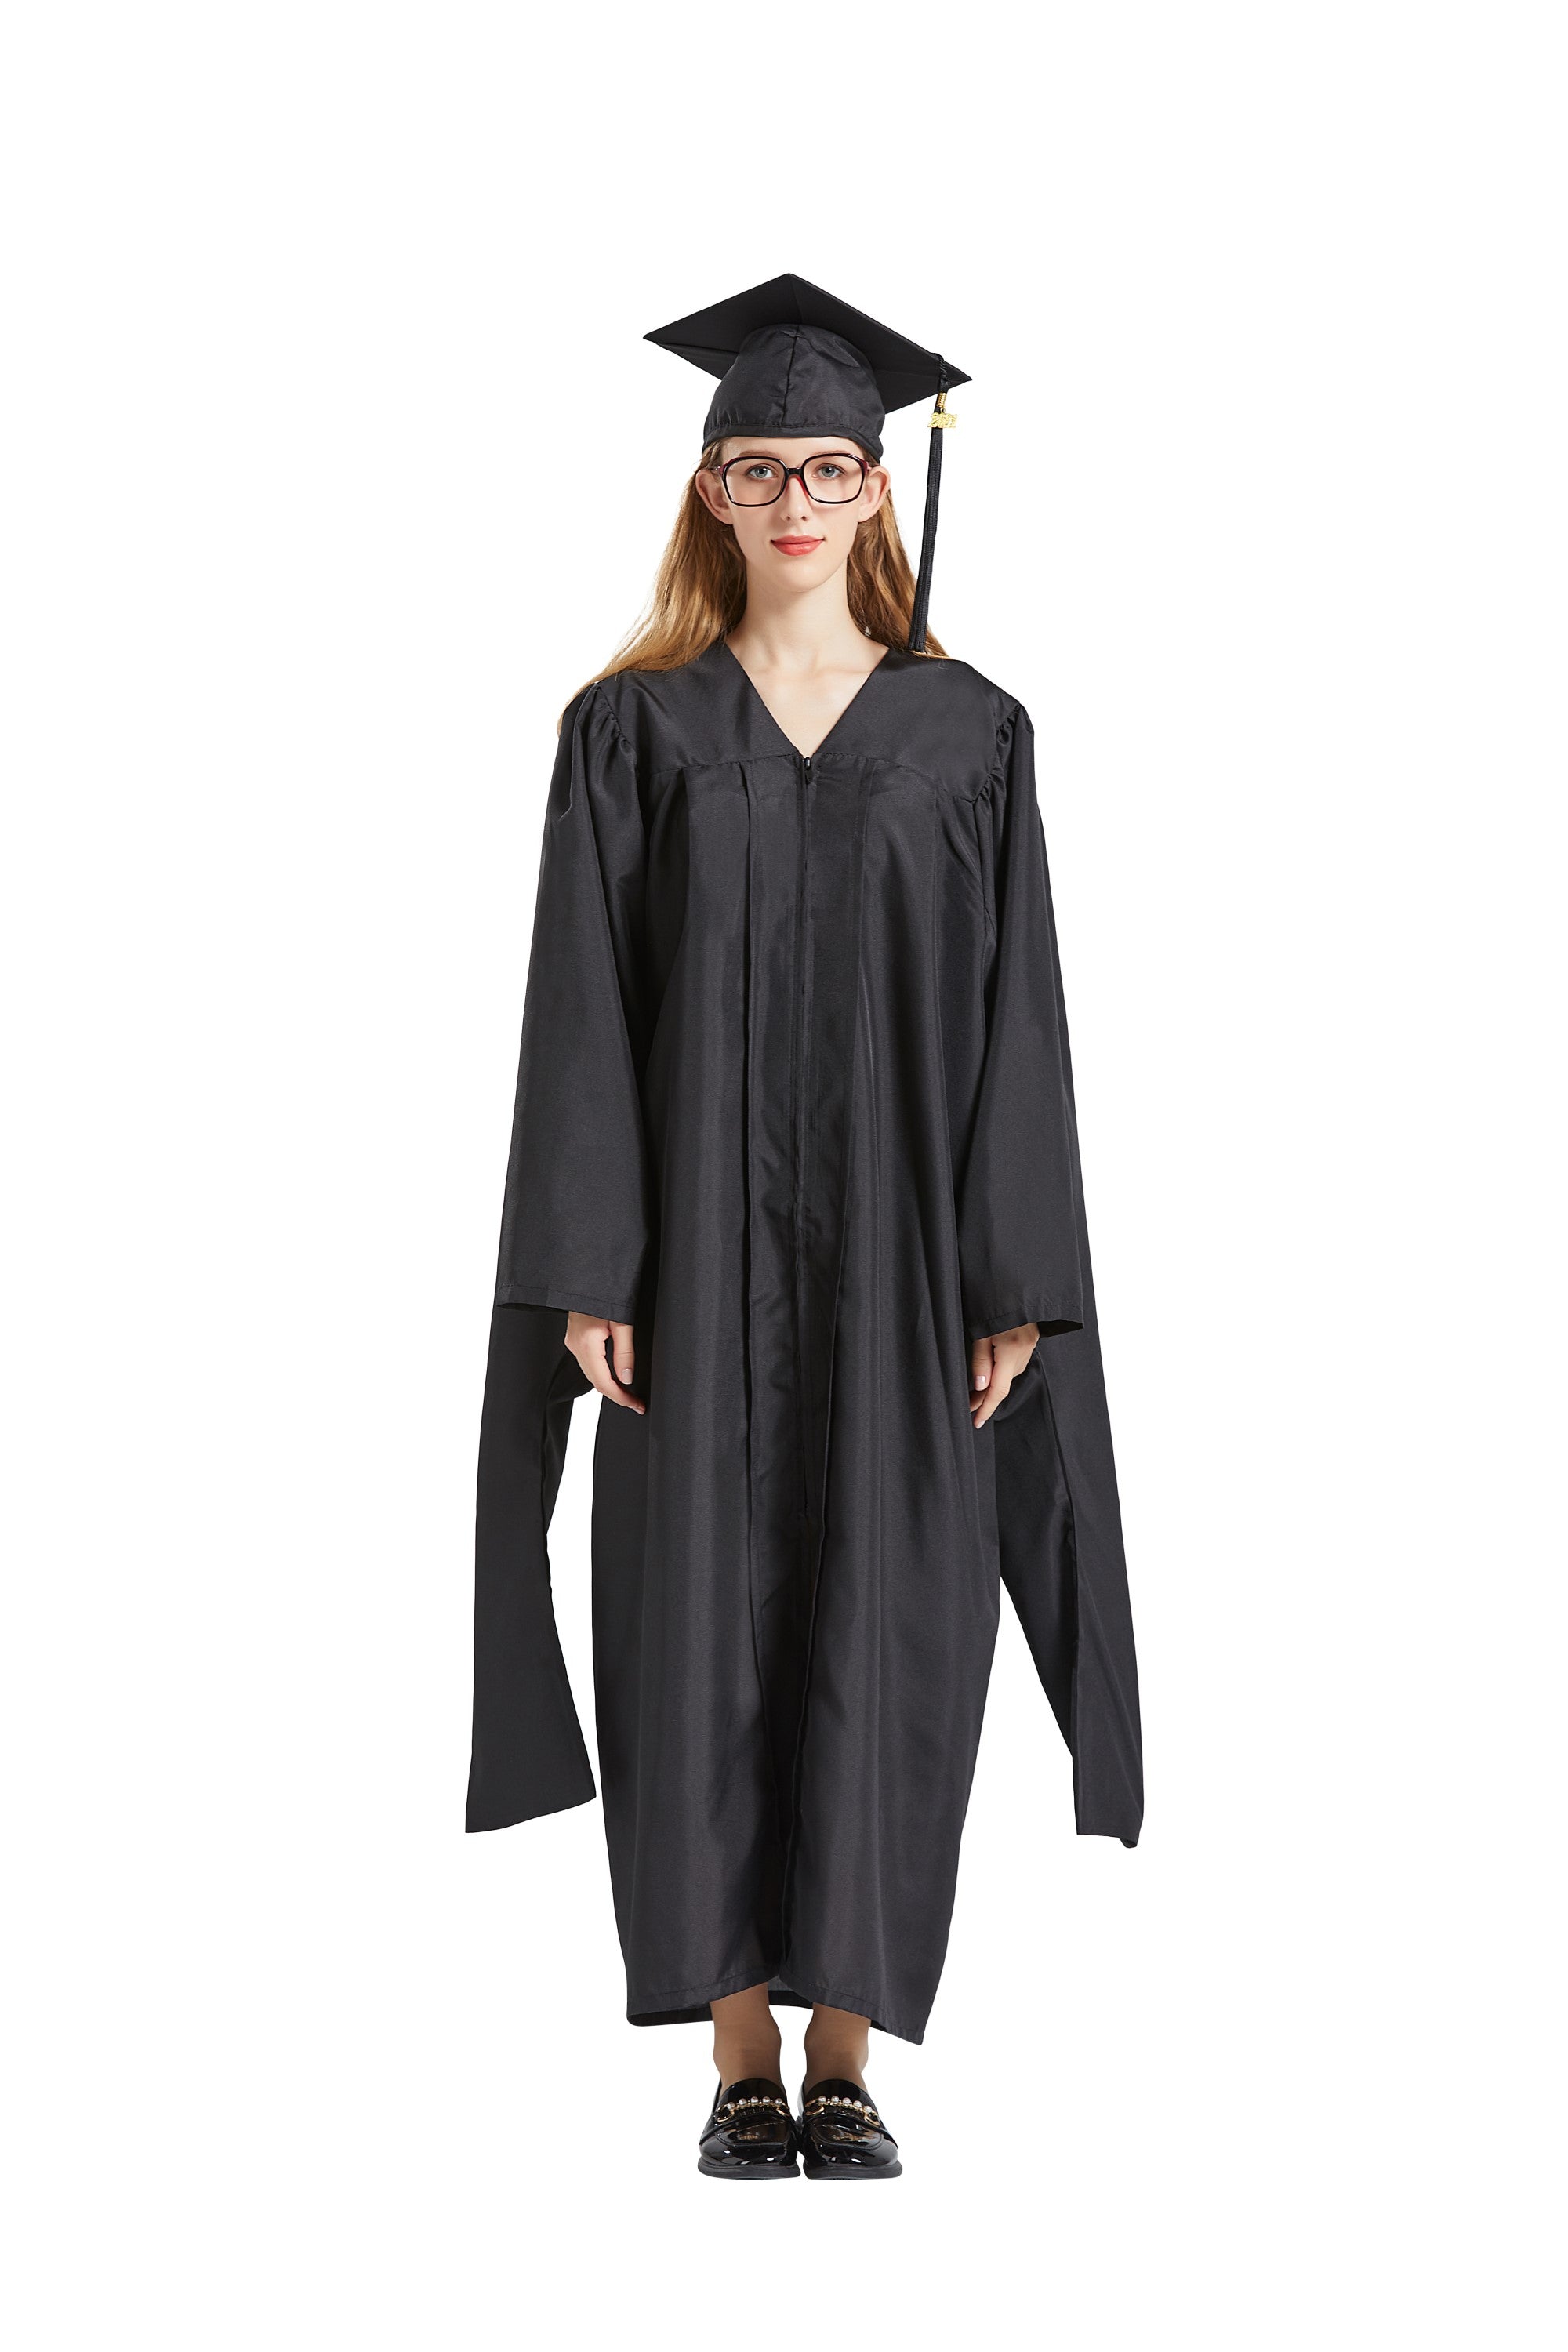 Man Wearing Black Graduation Gown and Cap Smiling · Free Stock Photo